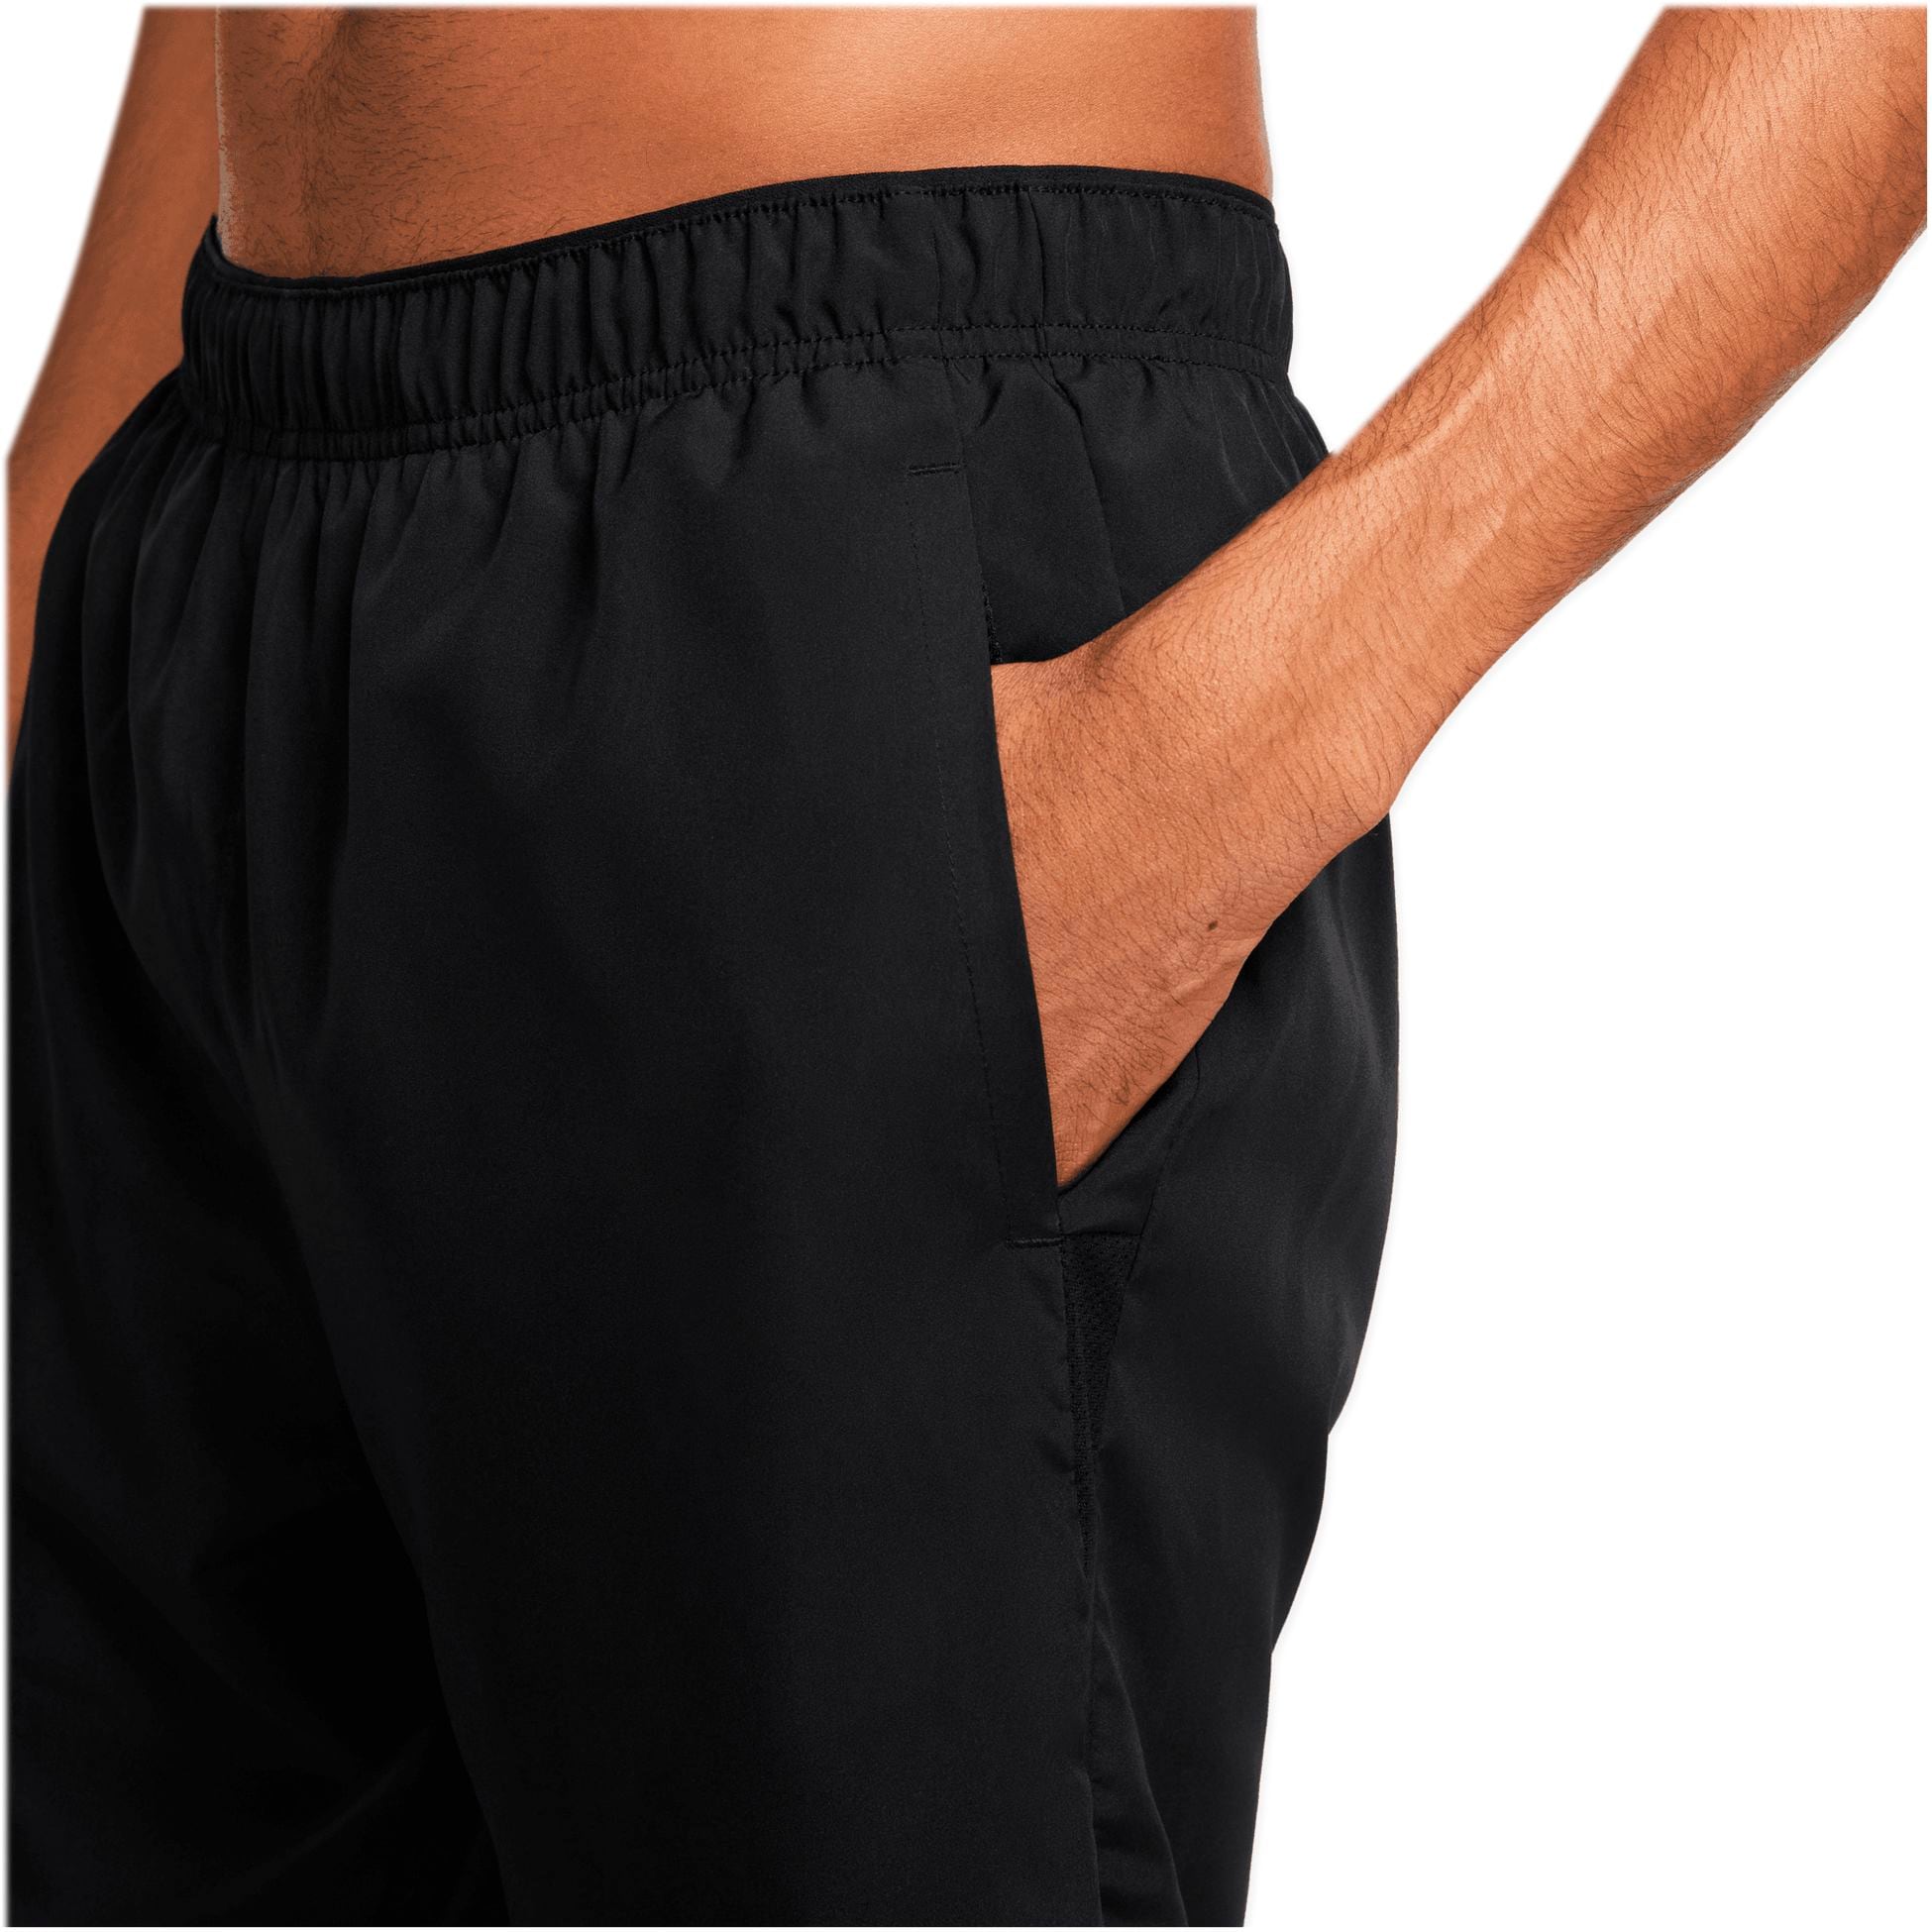 NIKE, M CHALLENGER 7" 2IN1 SHORTS